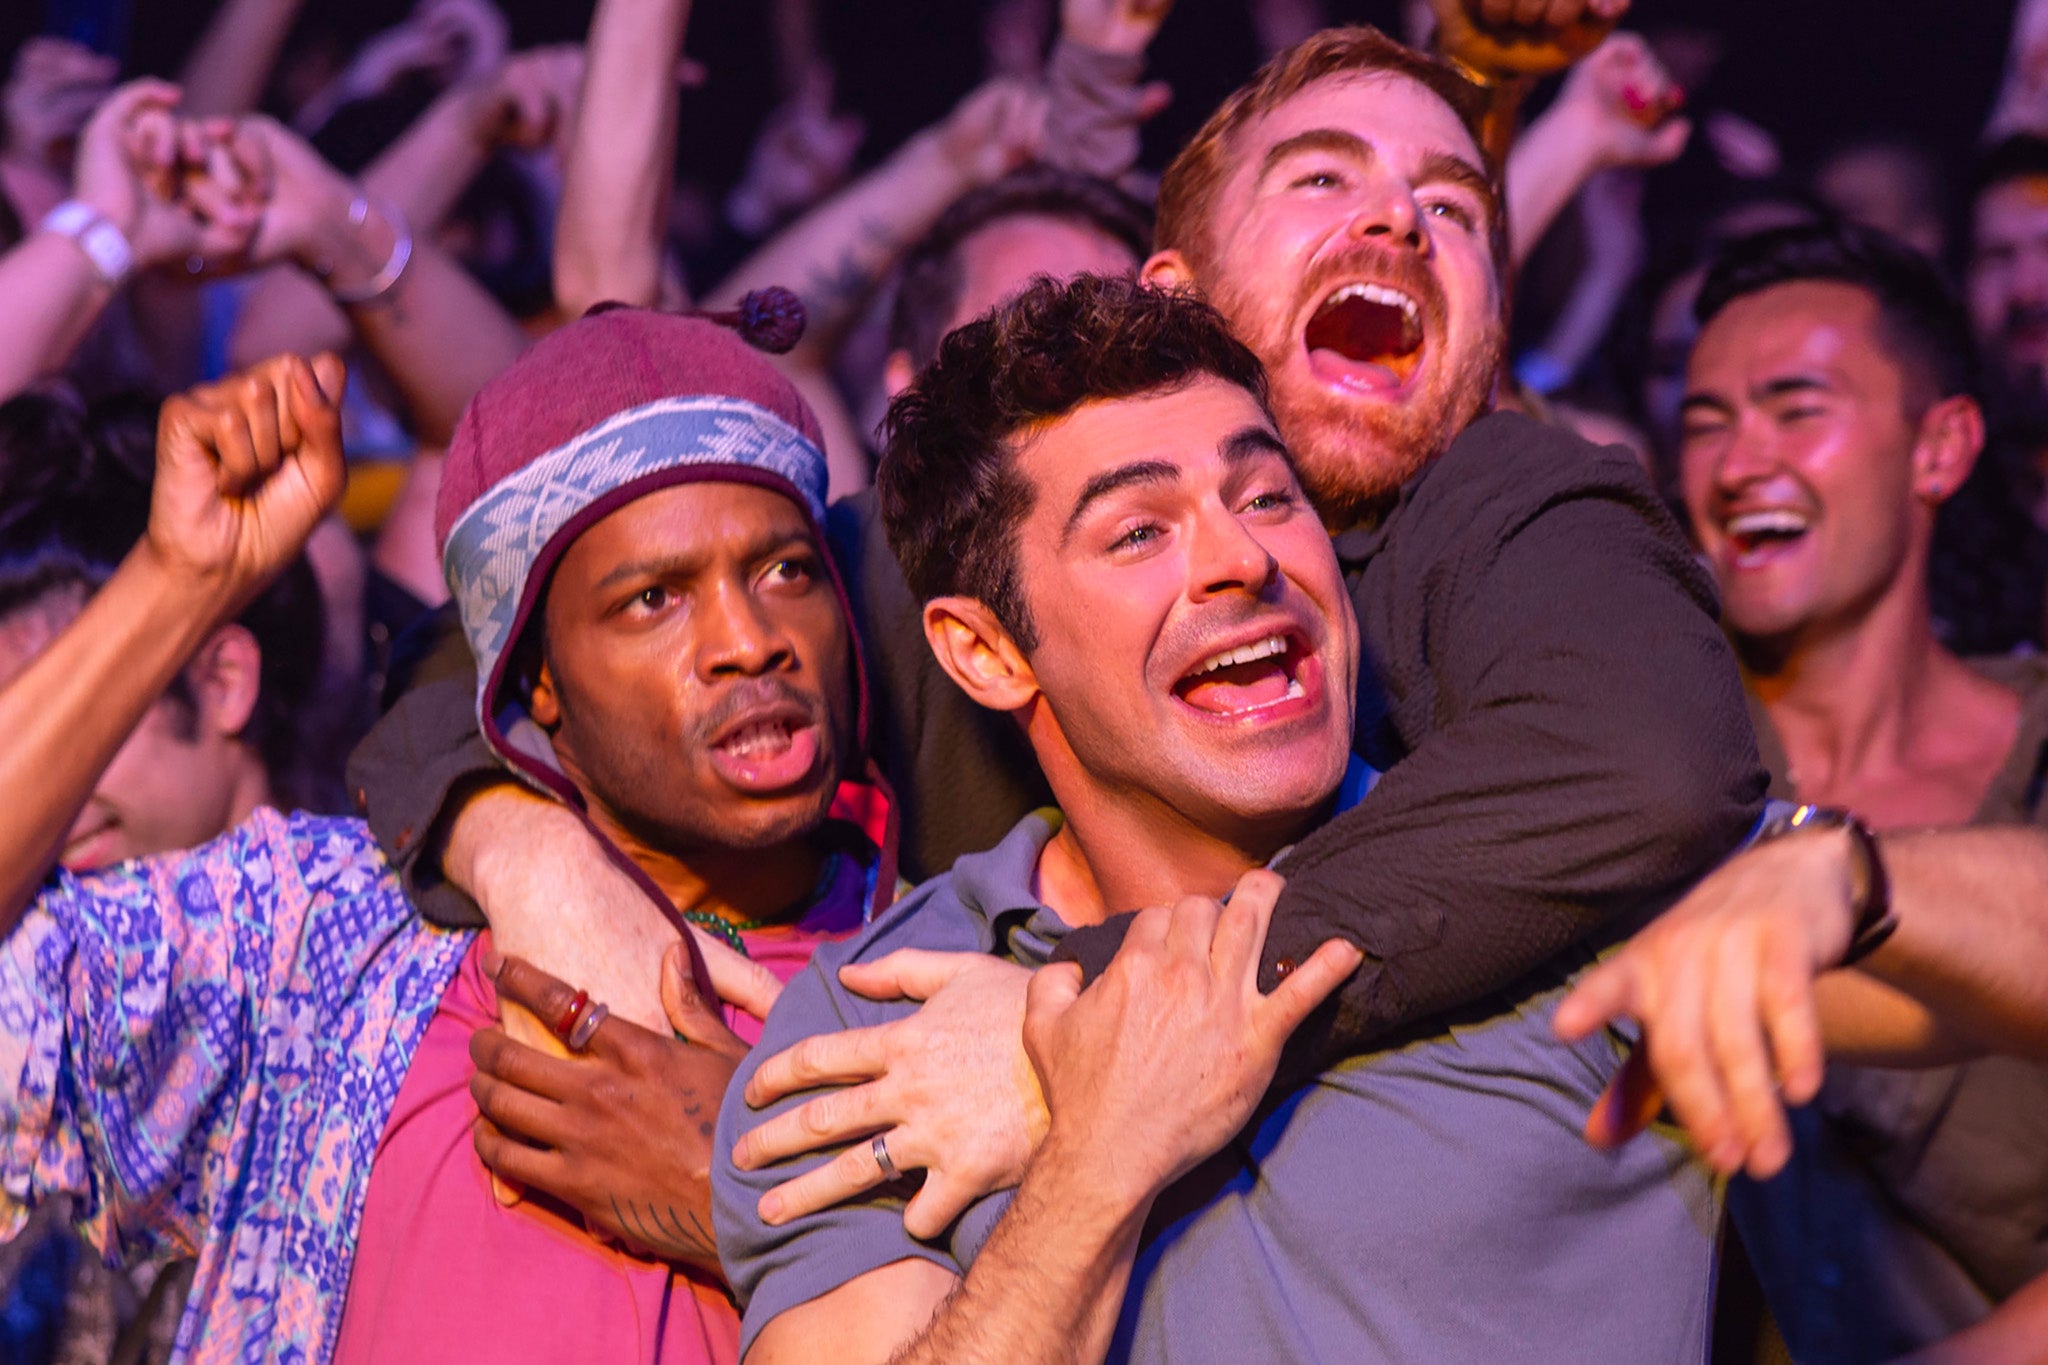 Lads lads lads: Jermaine Fowler, Zac Efron and Andrew Santino in ‘Ricky Stanicky'